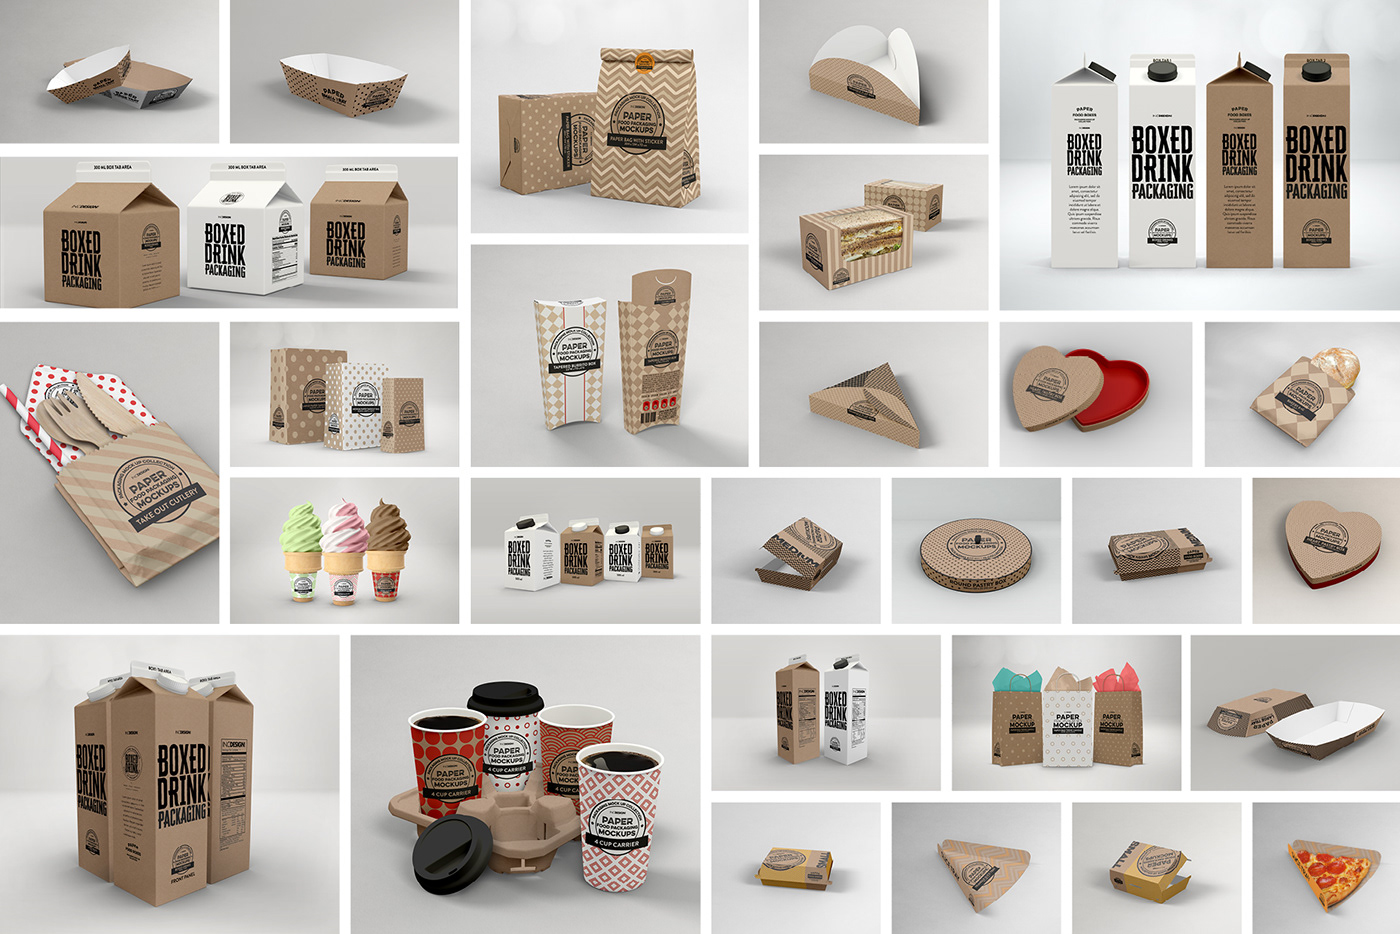 Download FREE Fast Food Packaging Mockup - UPDATED on Behance